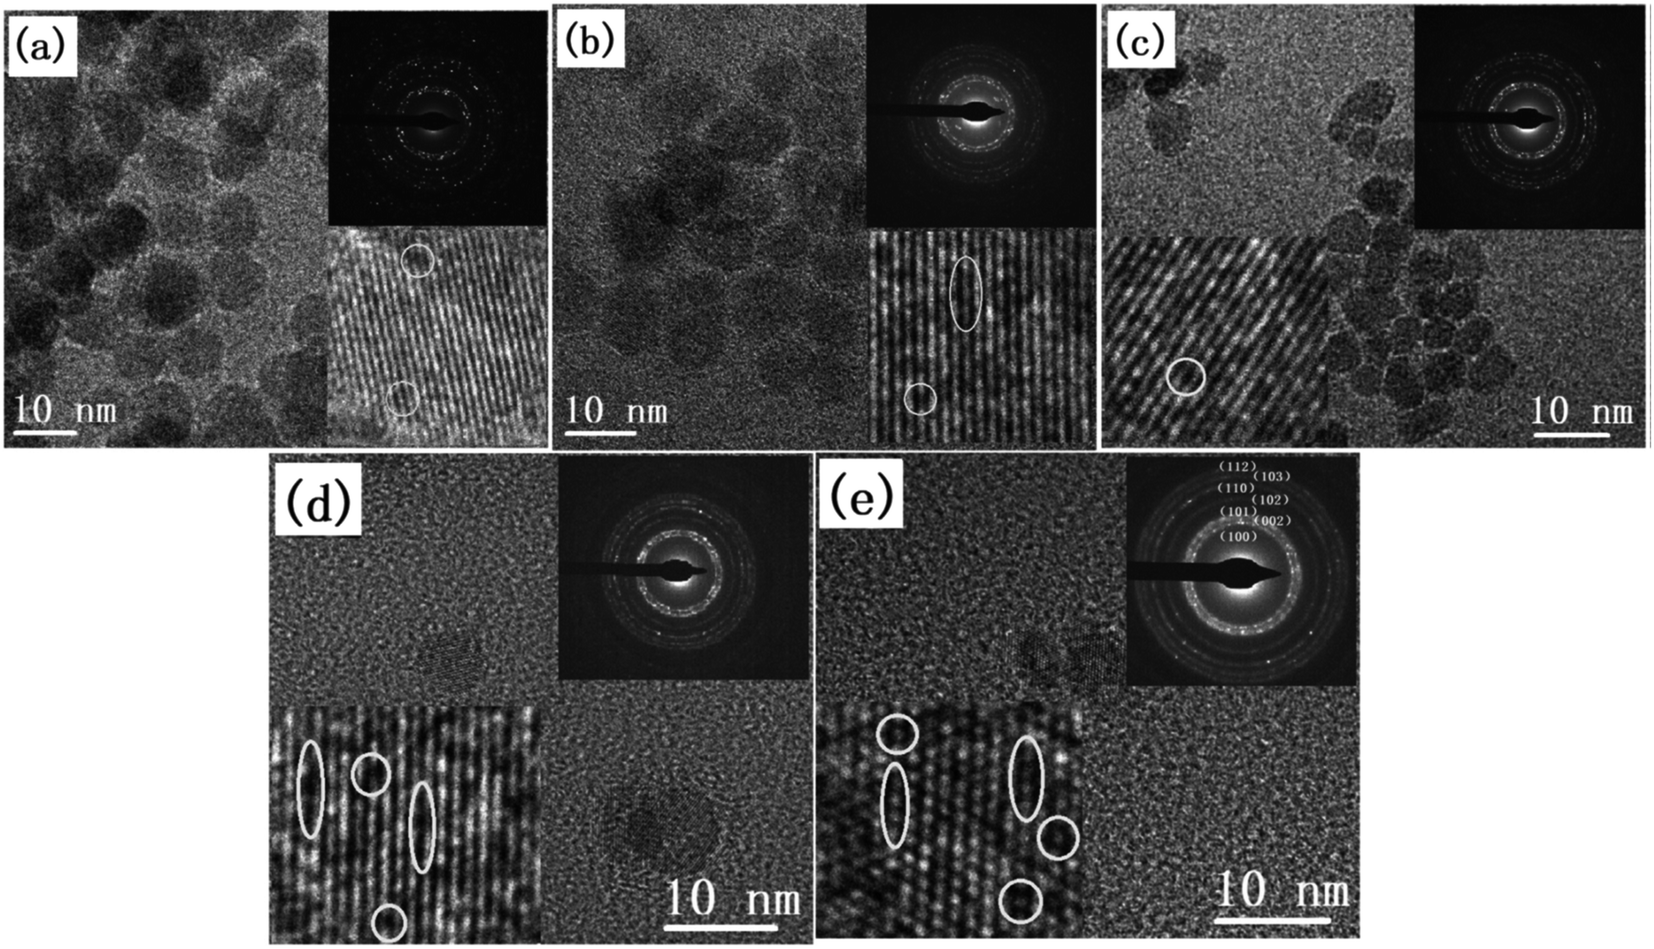 Journey Of Zno Quantum Dots From Undoped To Rare Earth And Transition Metal Doped And Their Applications Rsc Advances Rsc Publishing Doi 10 1039 D0rac